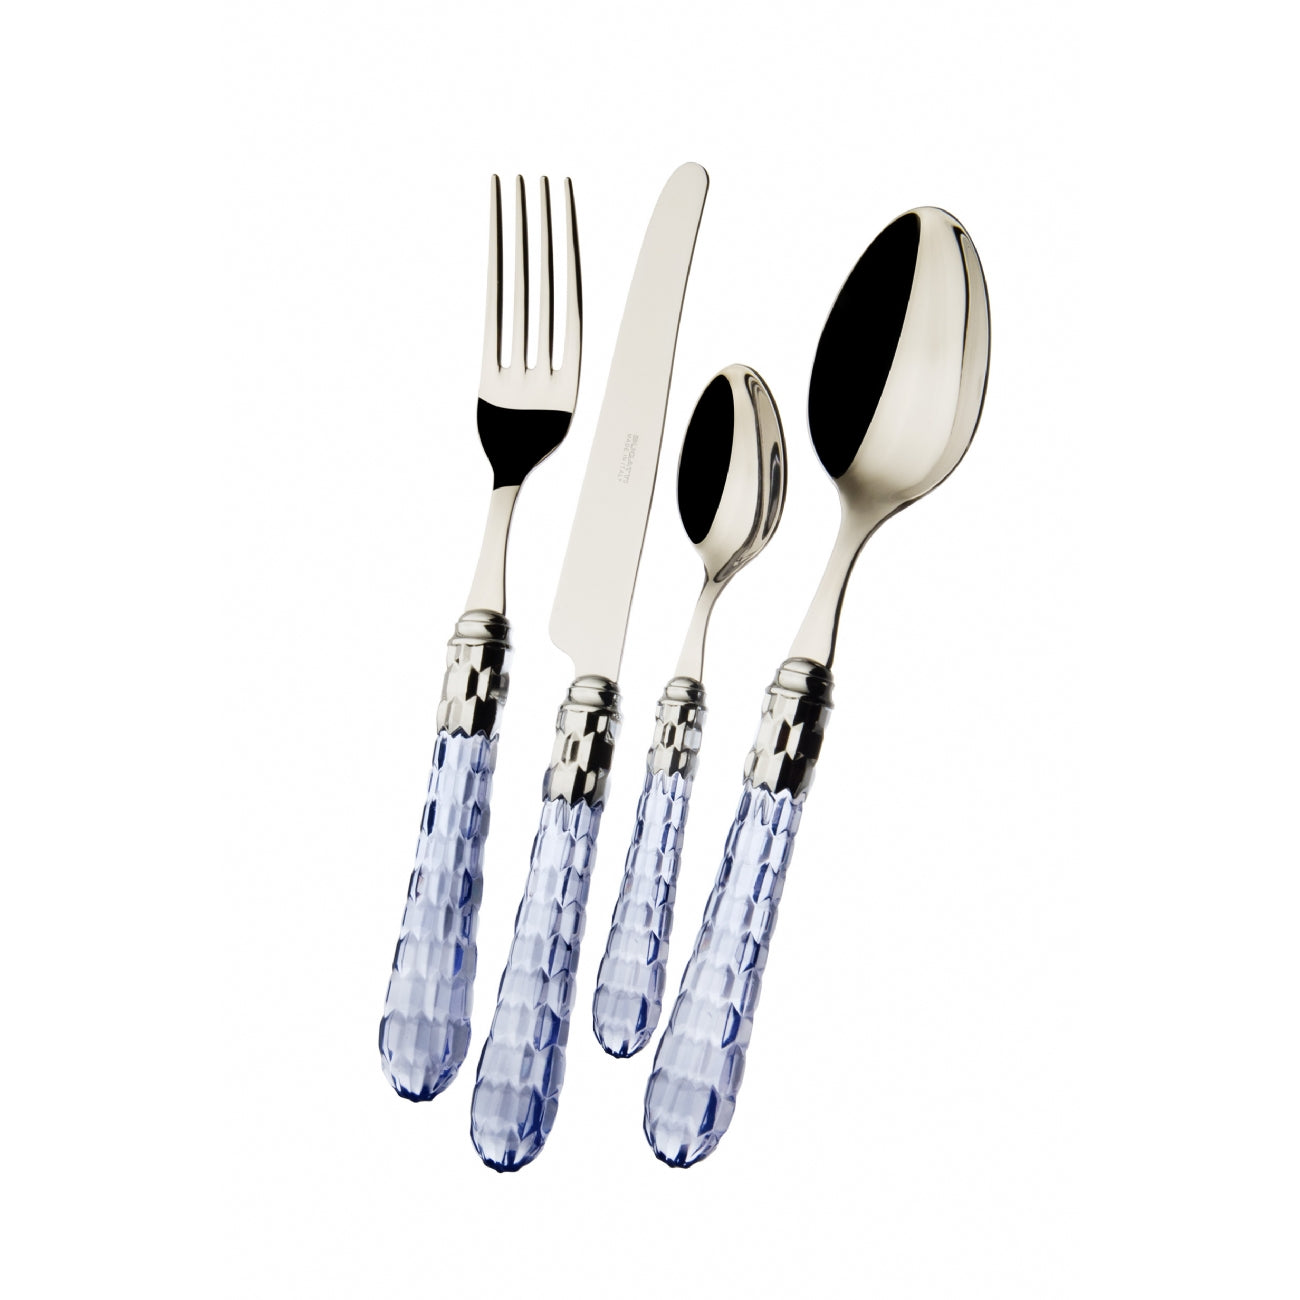 BUGATTI, Cristallo, 75-piece cutlery set in 18/10 stainless steel, chromed ring and transparent color handle